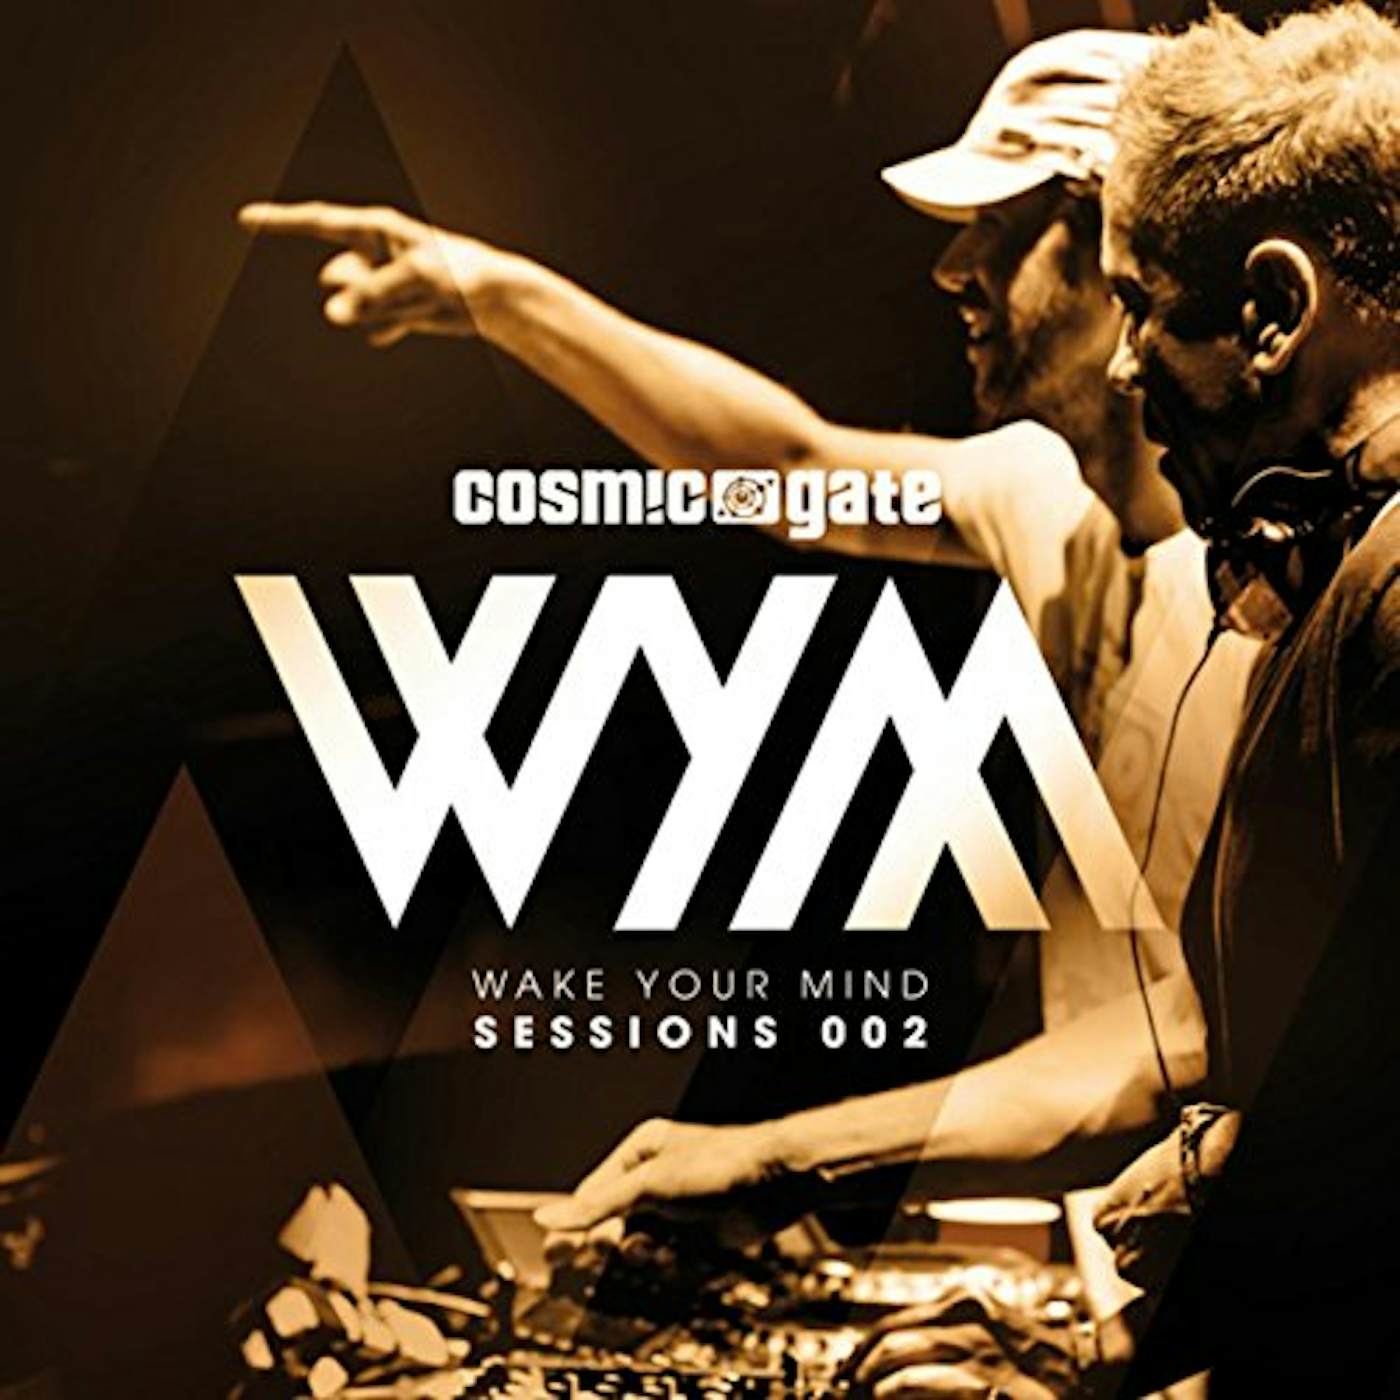 Cosmic Gate WAKE YOUR MIND SESSIONS 003 CD